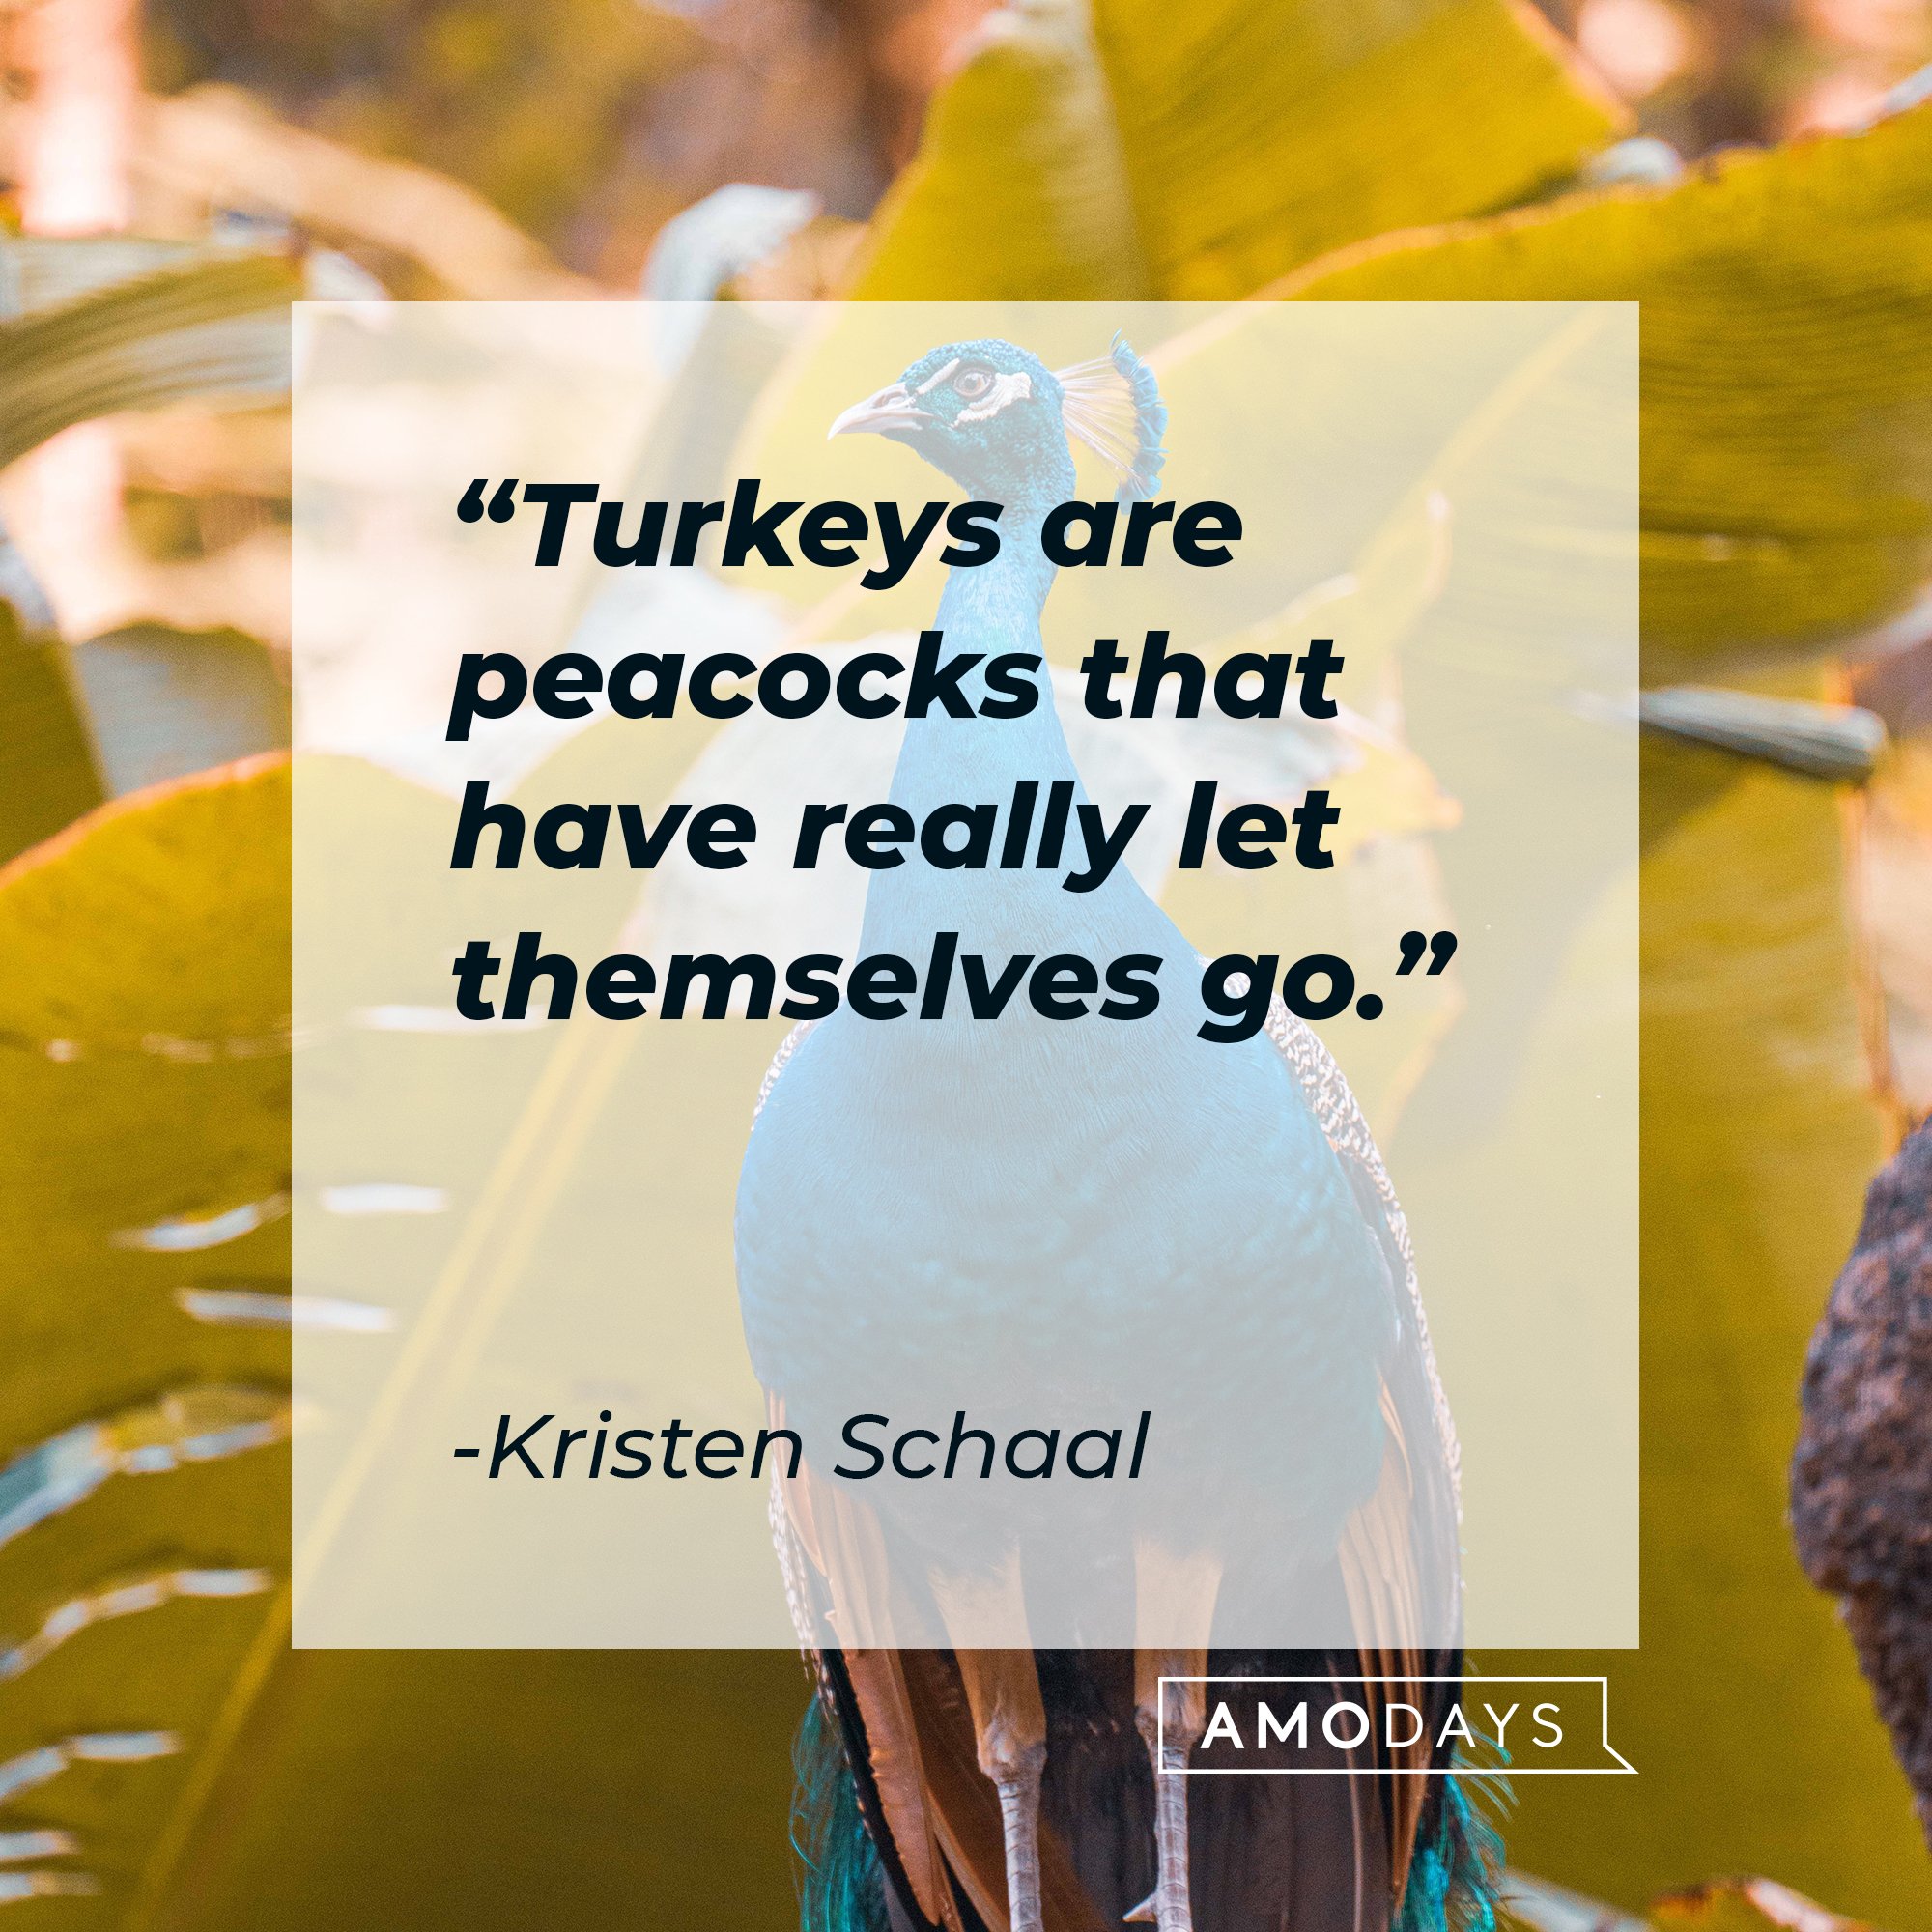 Kristen Schaal's quote: "Turkeys are peacocks that have really let themselves go." | Image: AmoDays